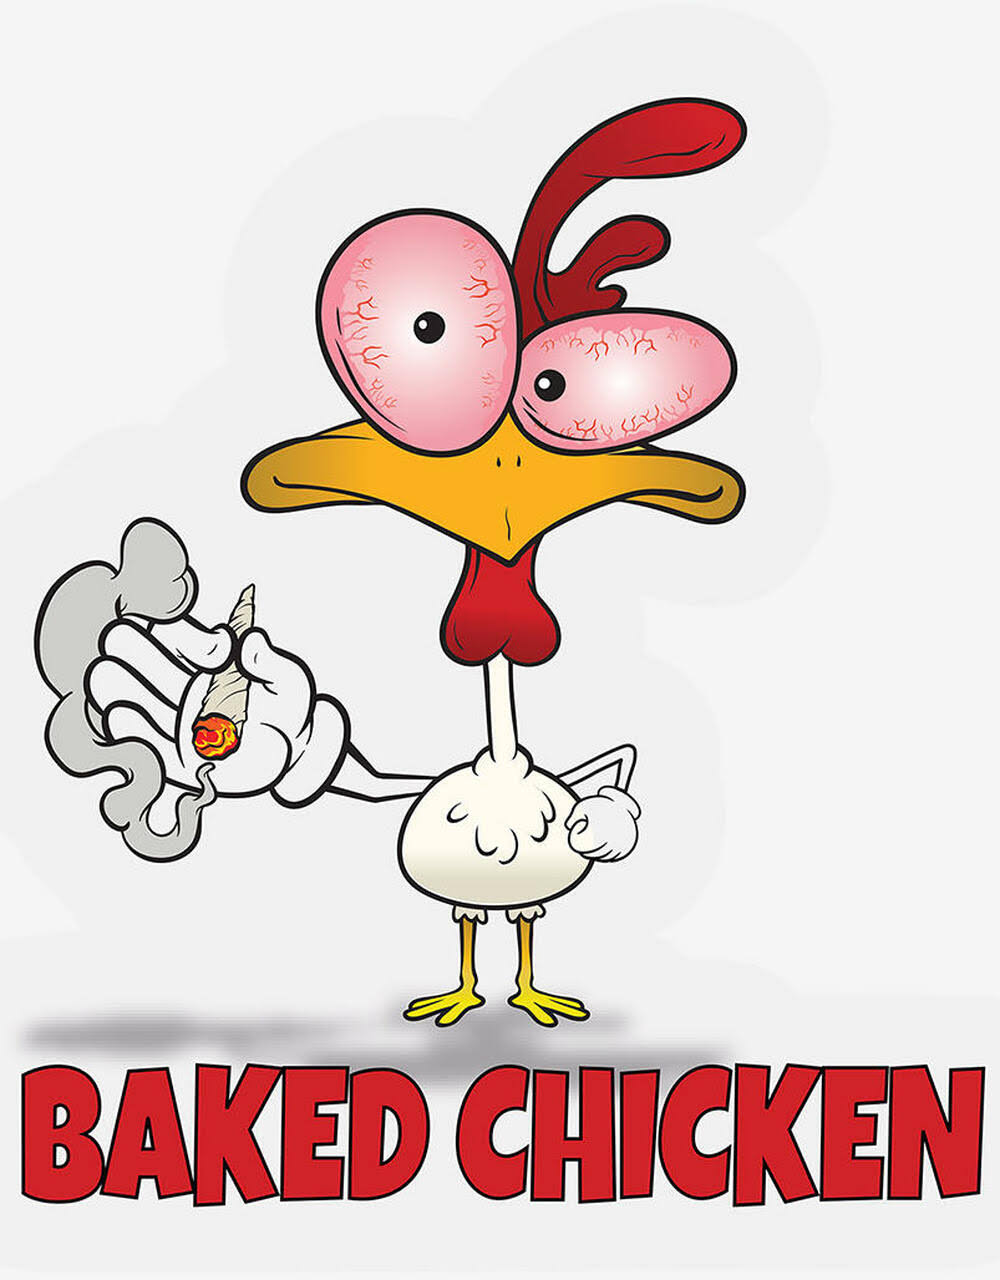 Baked Chicken 12.5" x 16" Metal Tin Sign - 2534